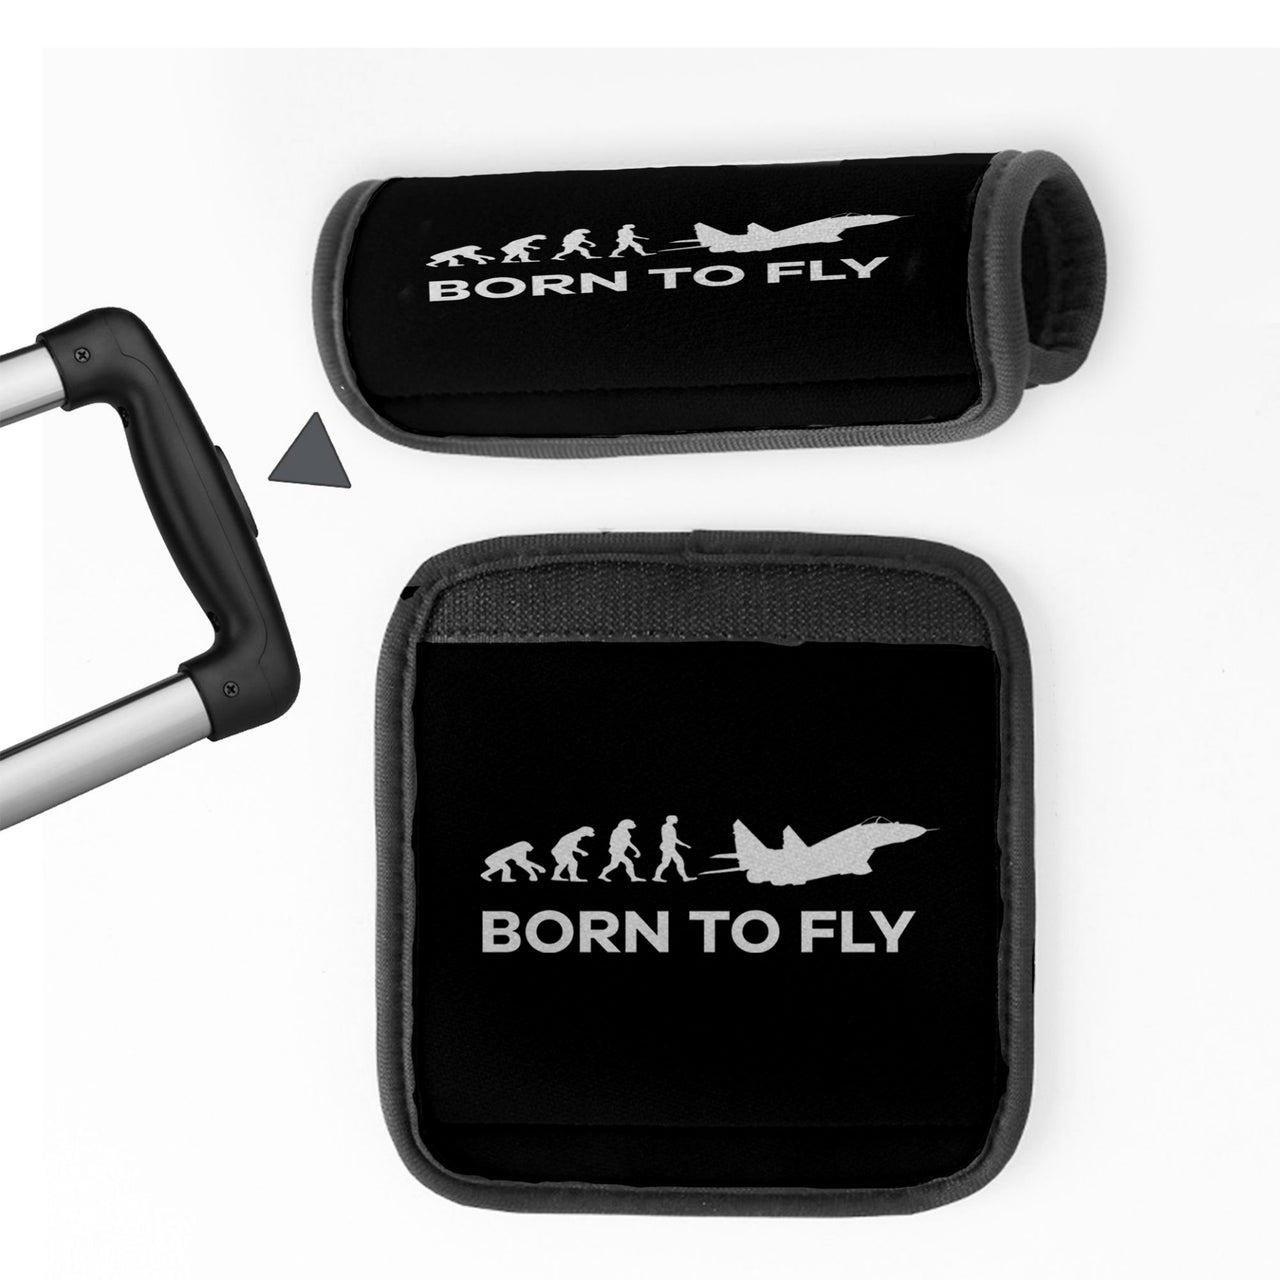 Born To Fly Military Designed Neoprene Luggage Handle Covers